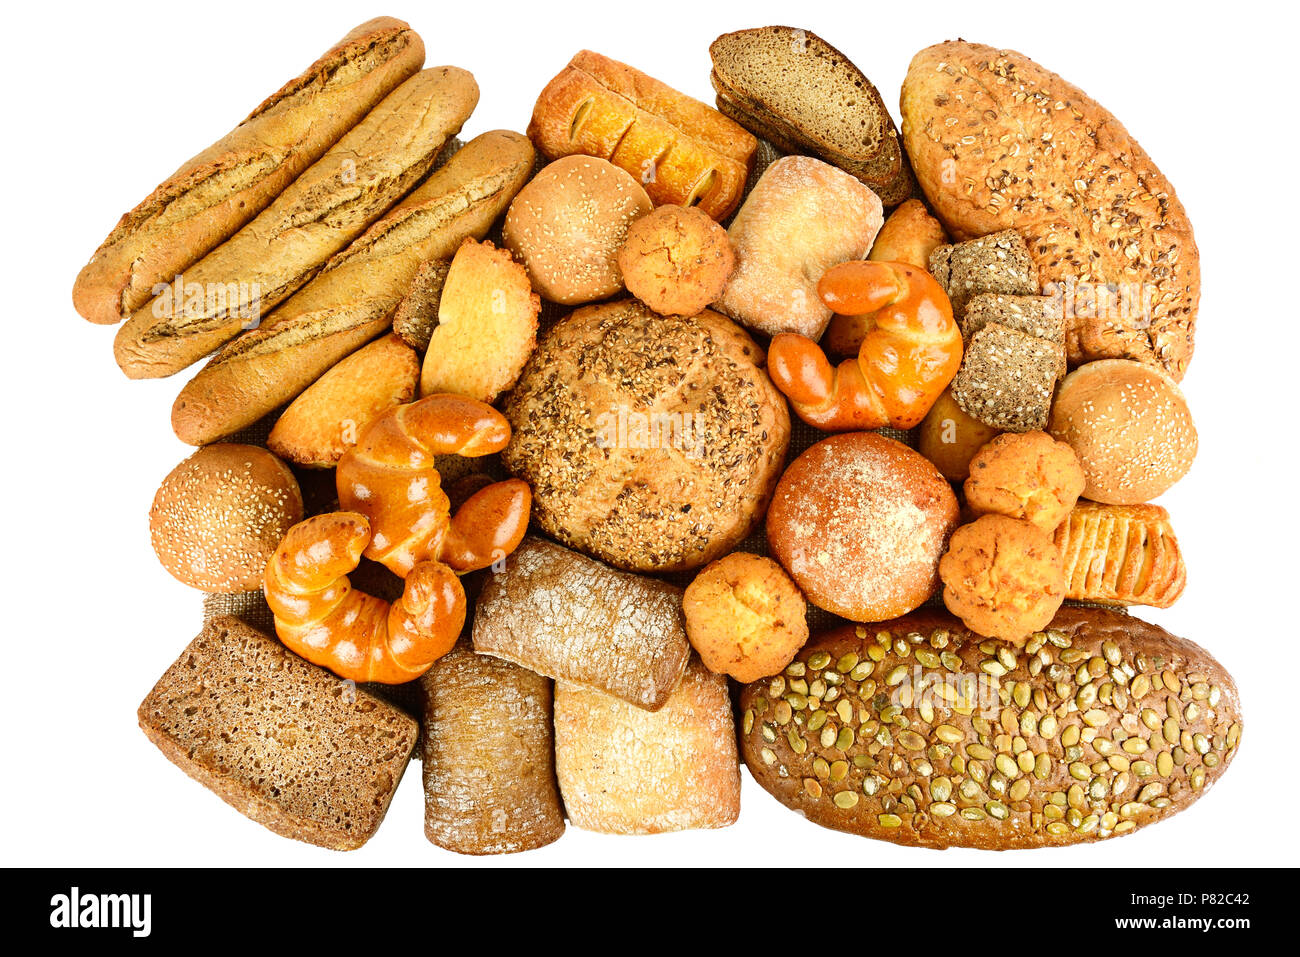 Collection of grain bread and baked goods isolated on white background. Top view. Flat lay Stock Photo